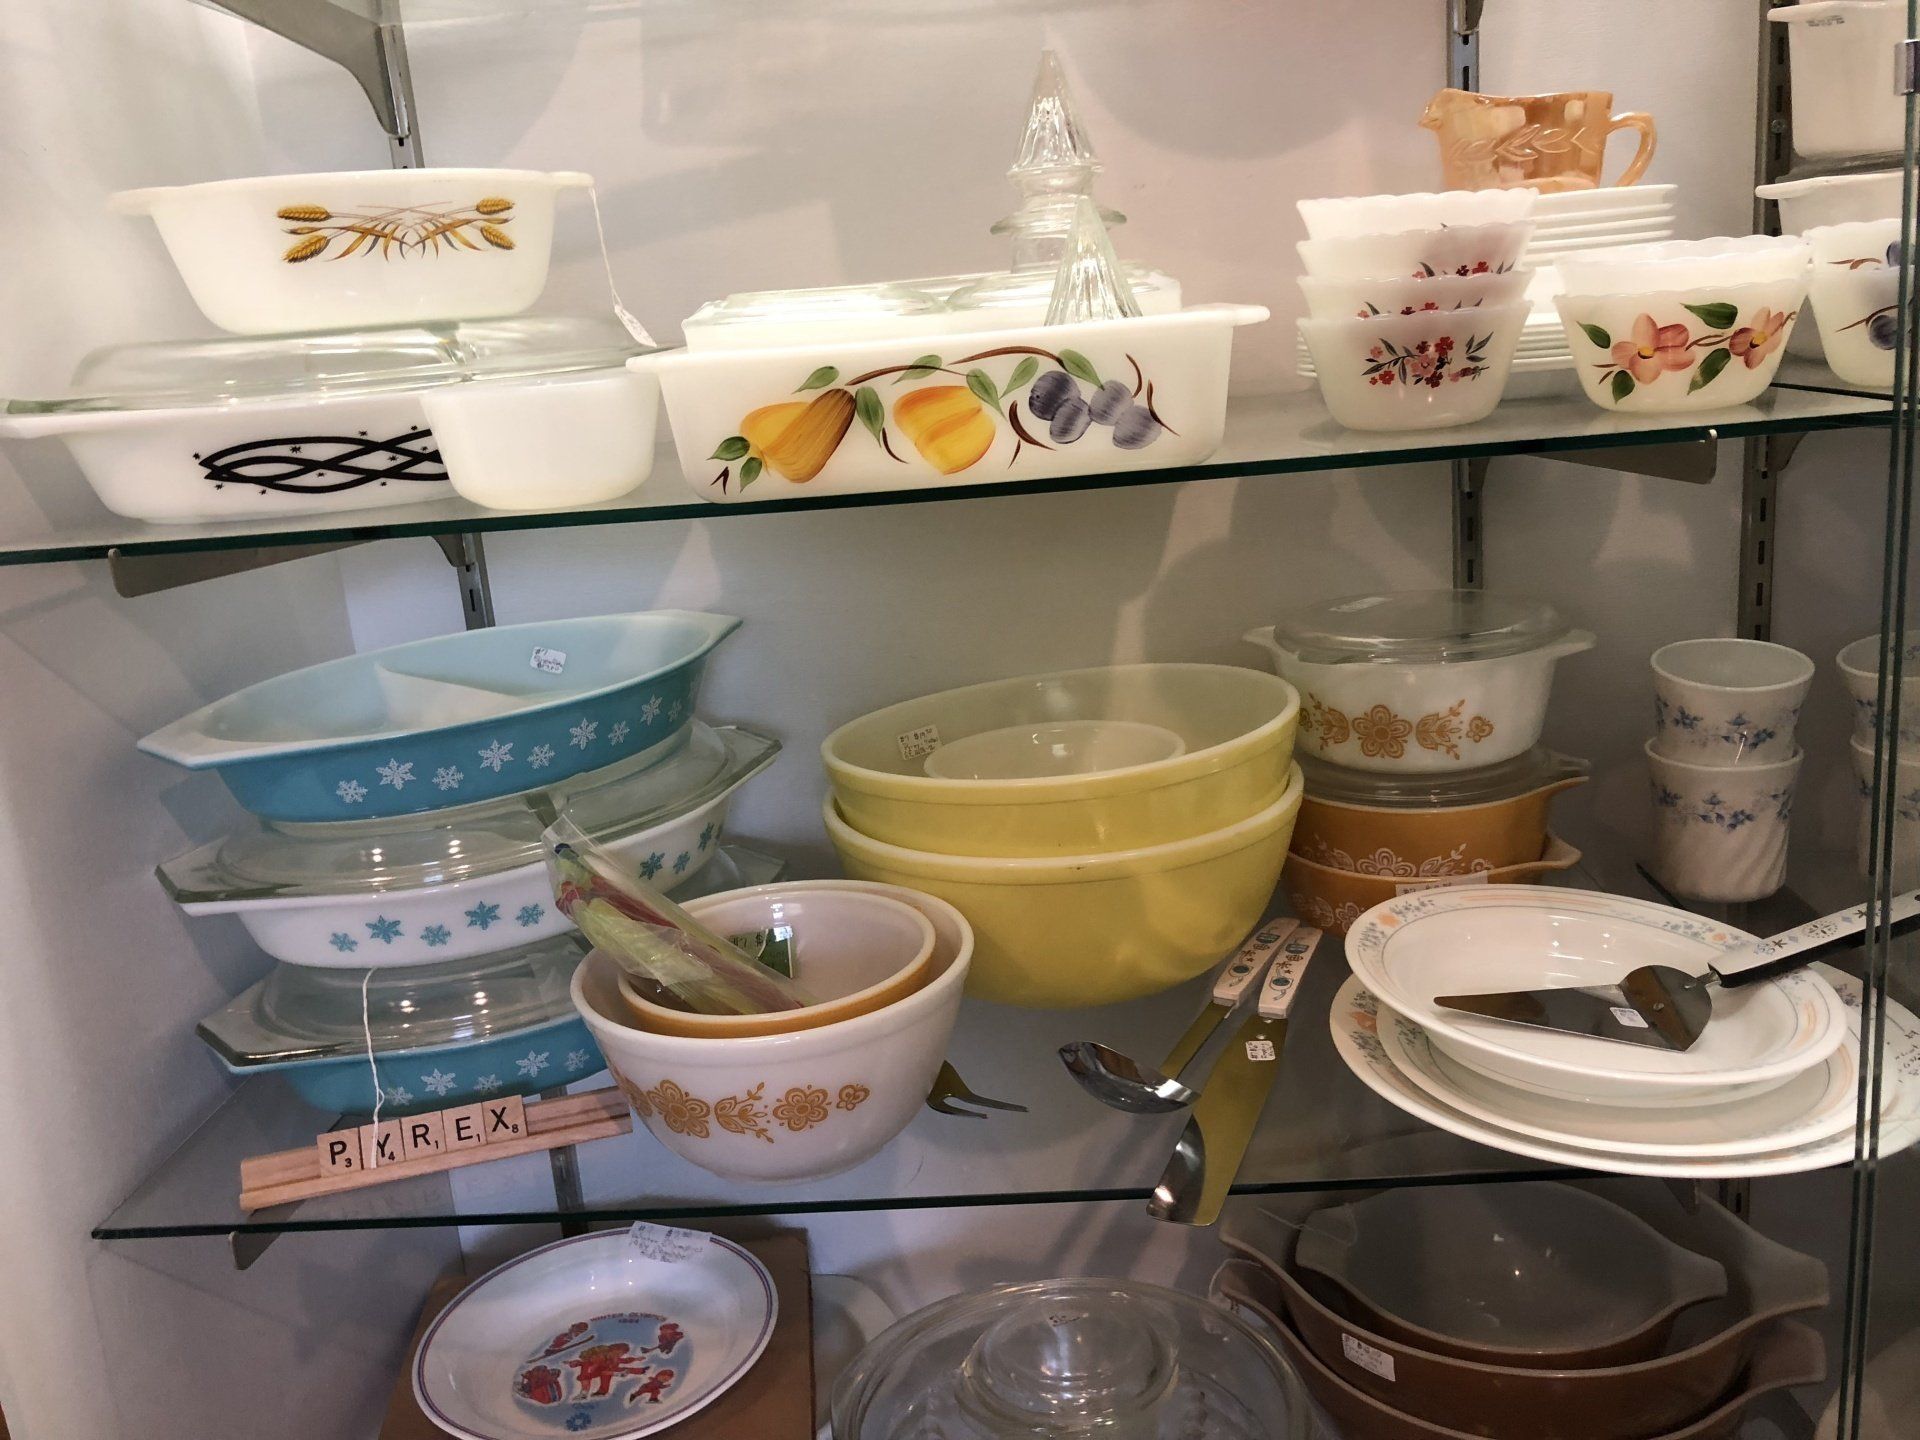 Pyrex-Vintage and Antique Furniture and Collectibles in Bouckville, New York